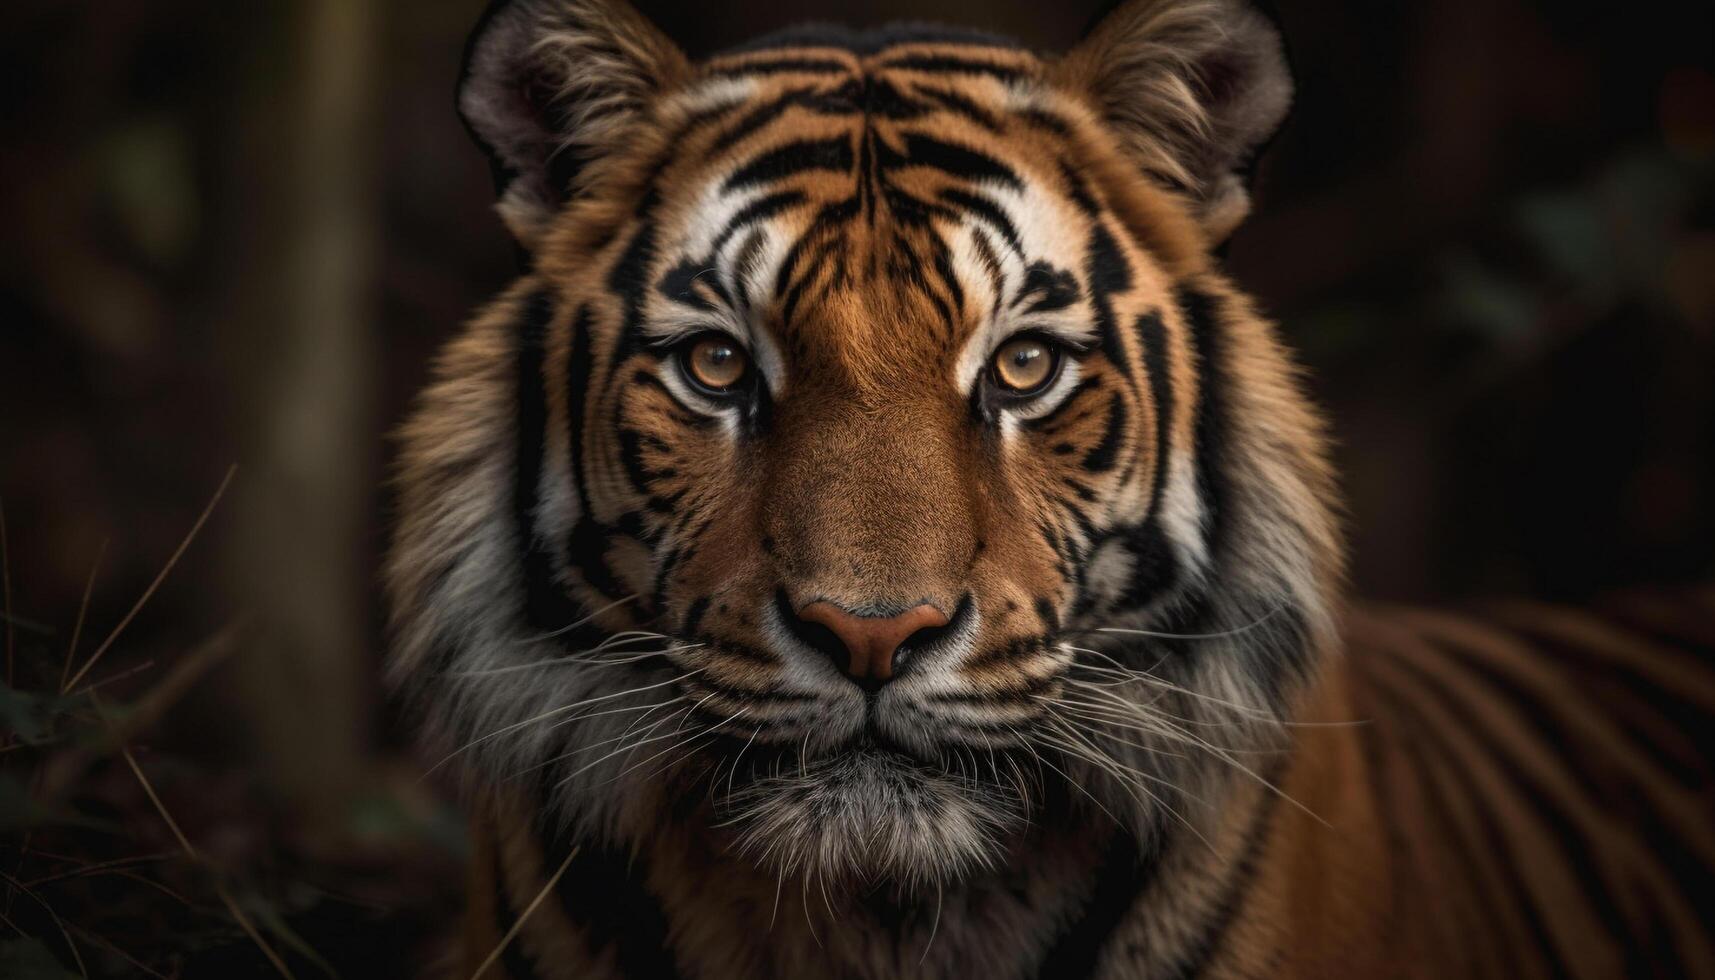 Bengal tiger staring, majestic and dangerous in the wild forest generated by AI photo